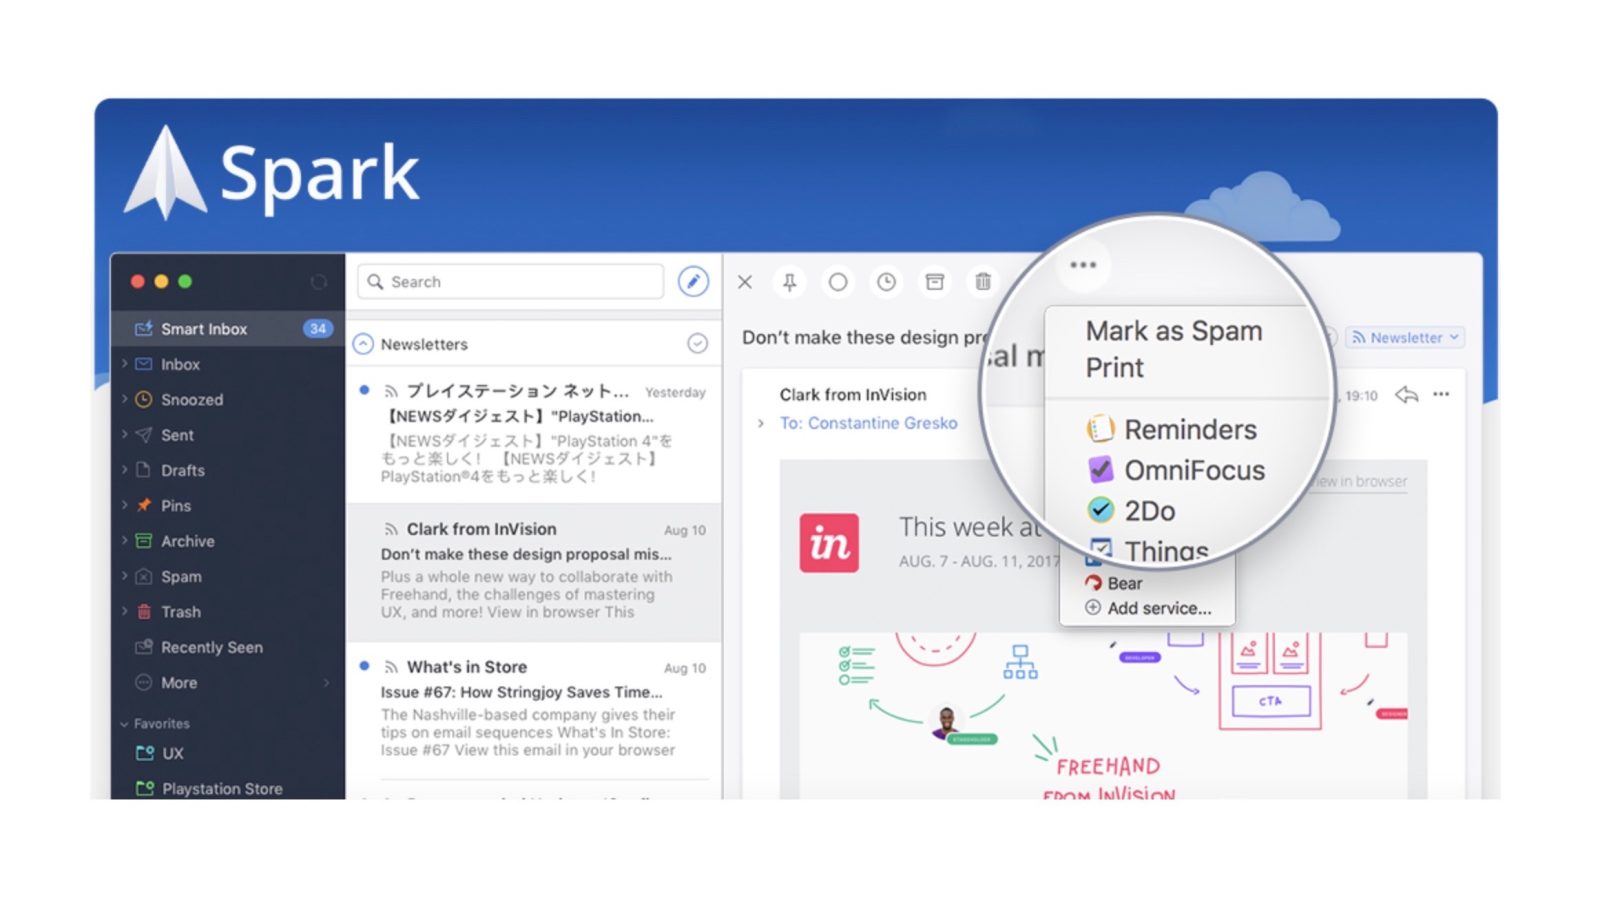 Readdle brings helpful 3rd party integrations to Spark email app 9to5Mac